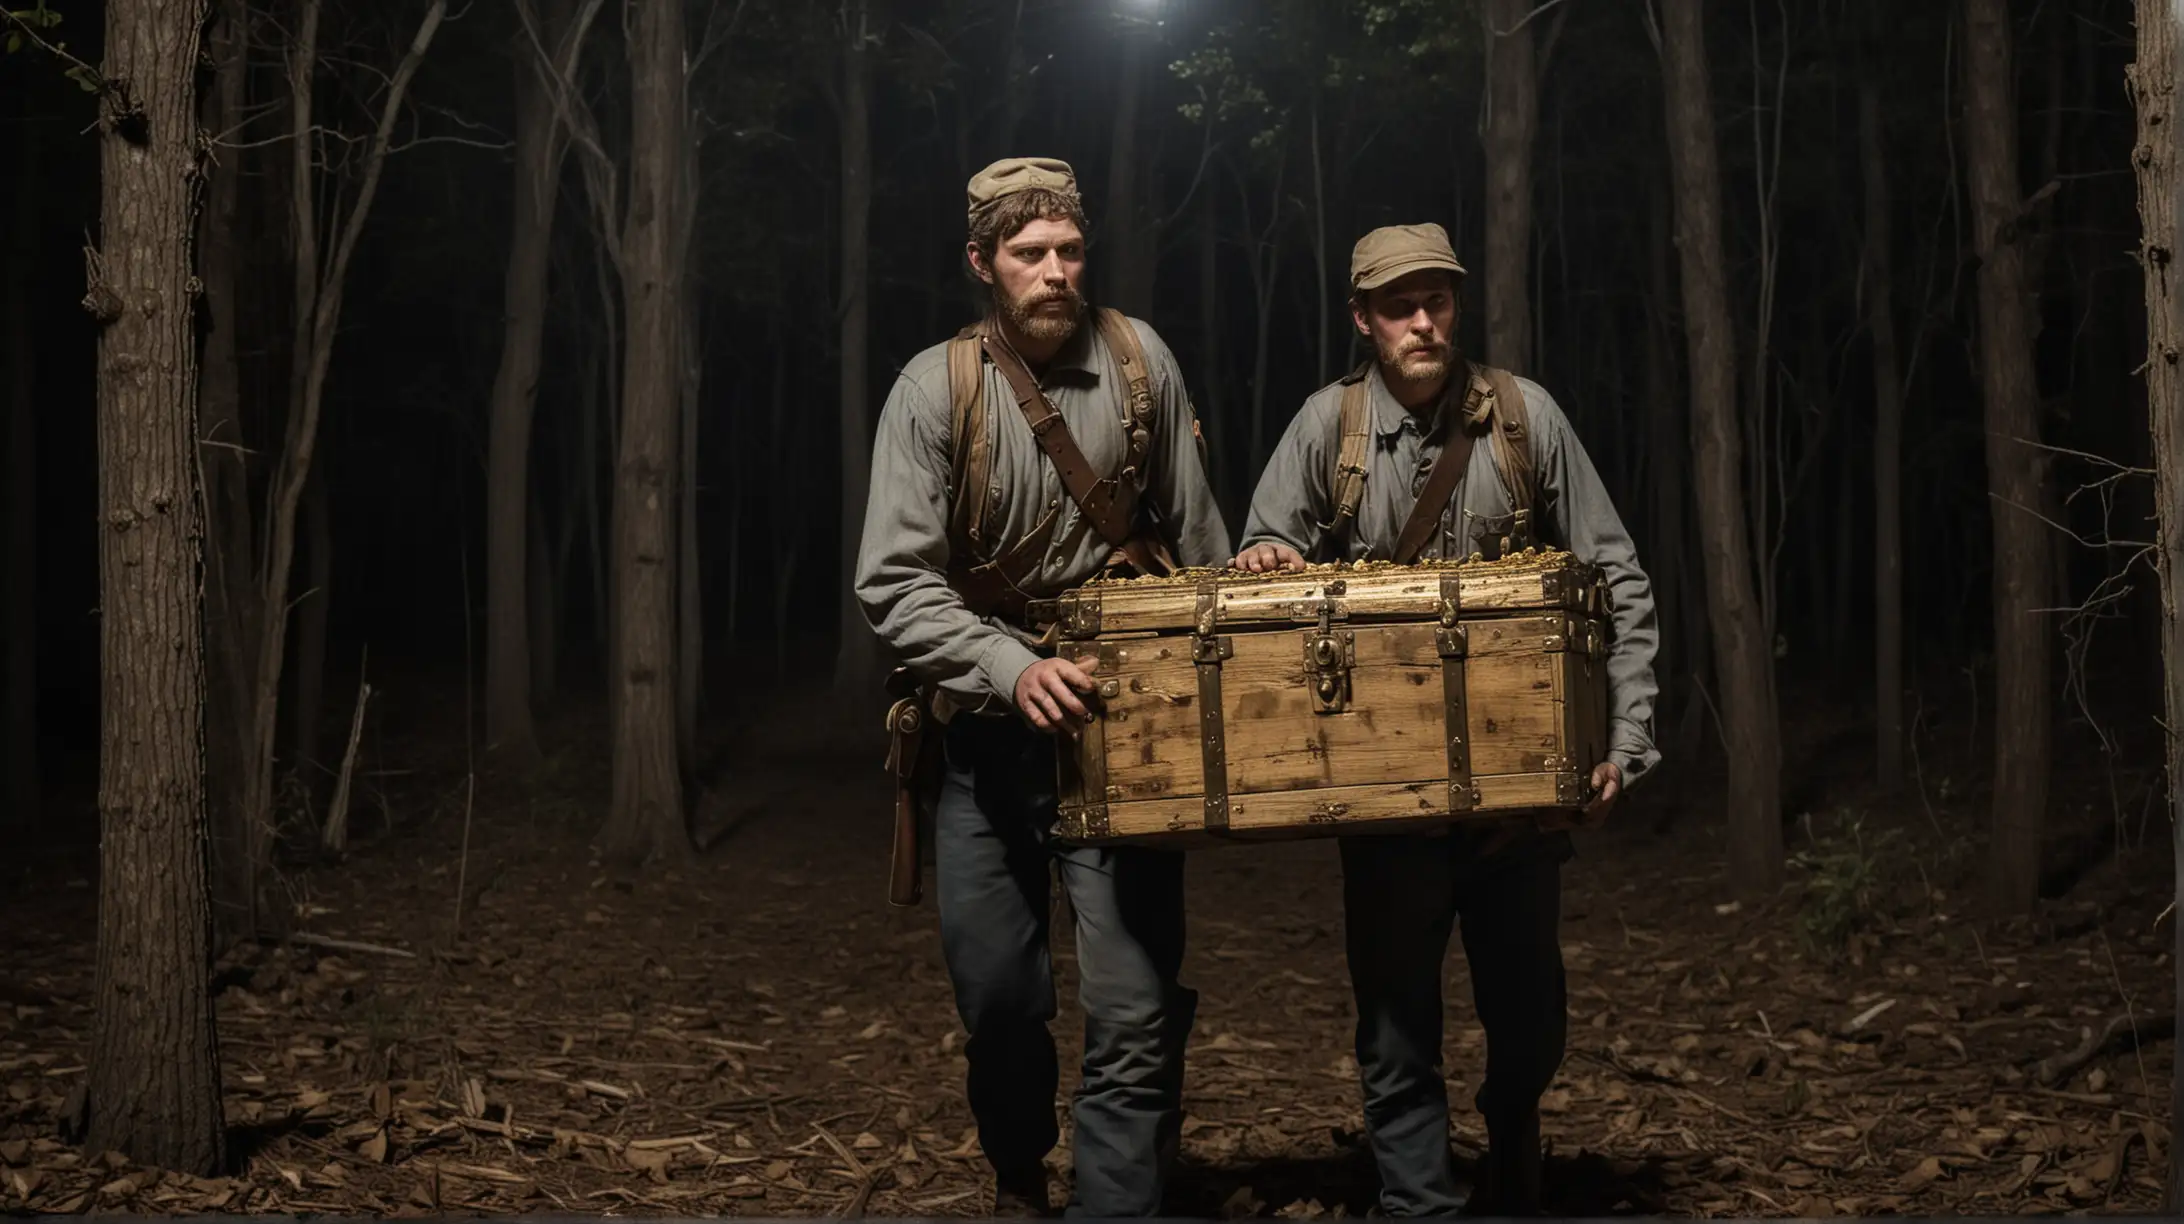 Confederate Civil War Soldiers with Gold Chest in Night Woods